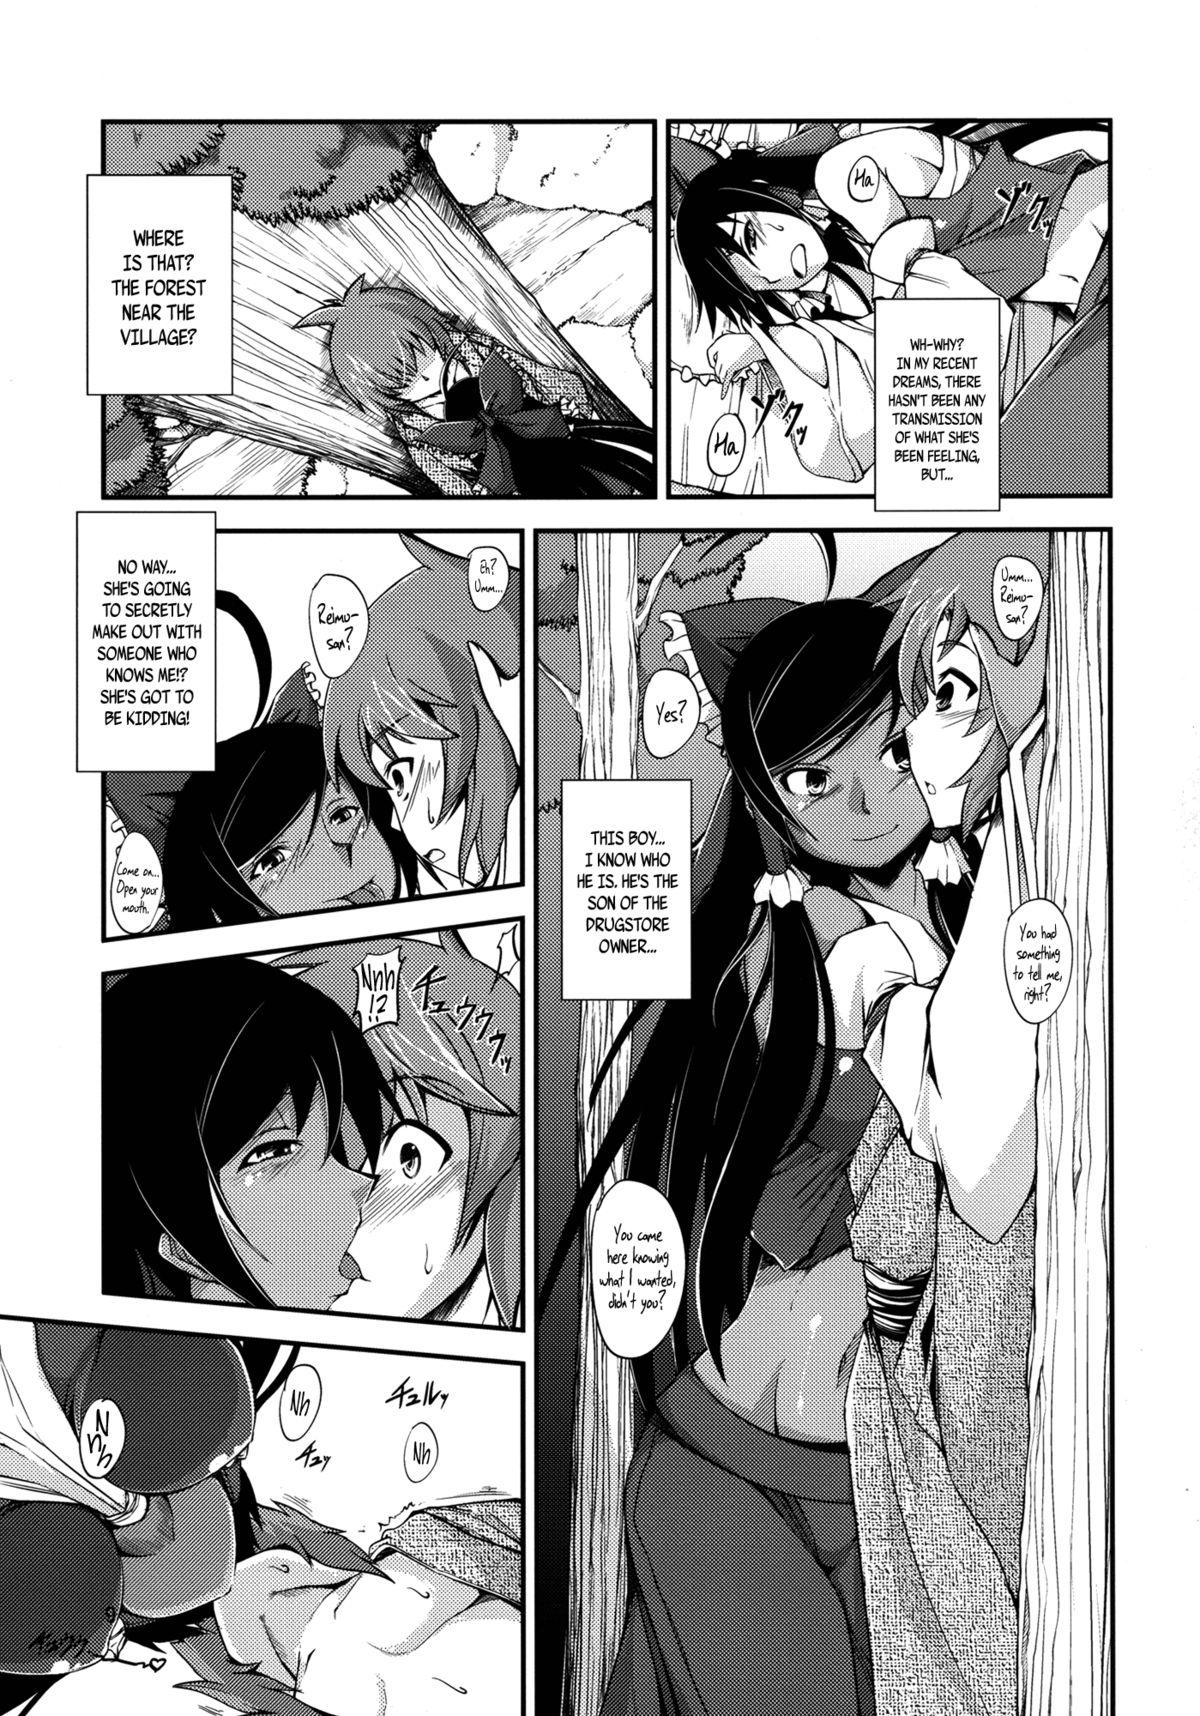 Pussy Lick (Reitaisai 10) [JUNK × JUNK (kojou)] Kuro Miko no Hen ~Sono Ni~ | The Incident of the Black Shrine Maiden ~Part 2~ (Touhou Project) [English] {Afro} - Touhou project Amigos - Page 9